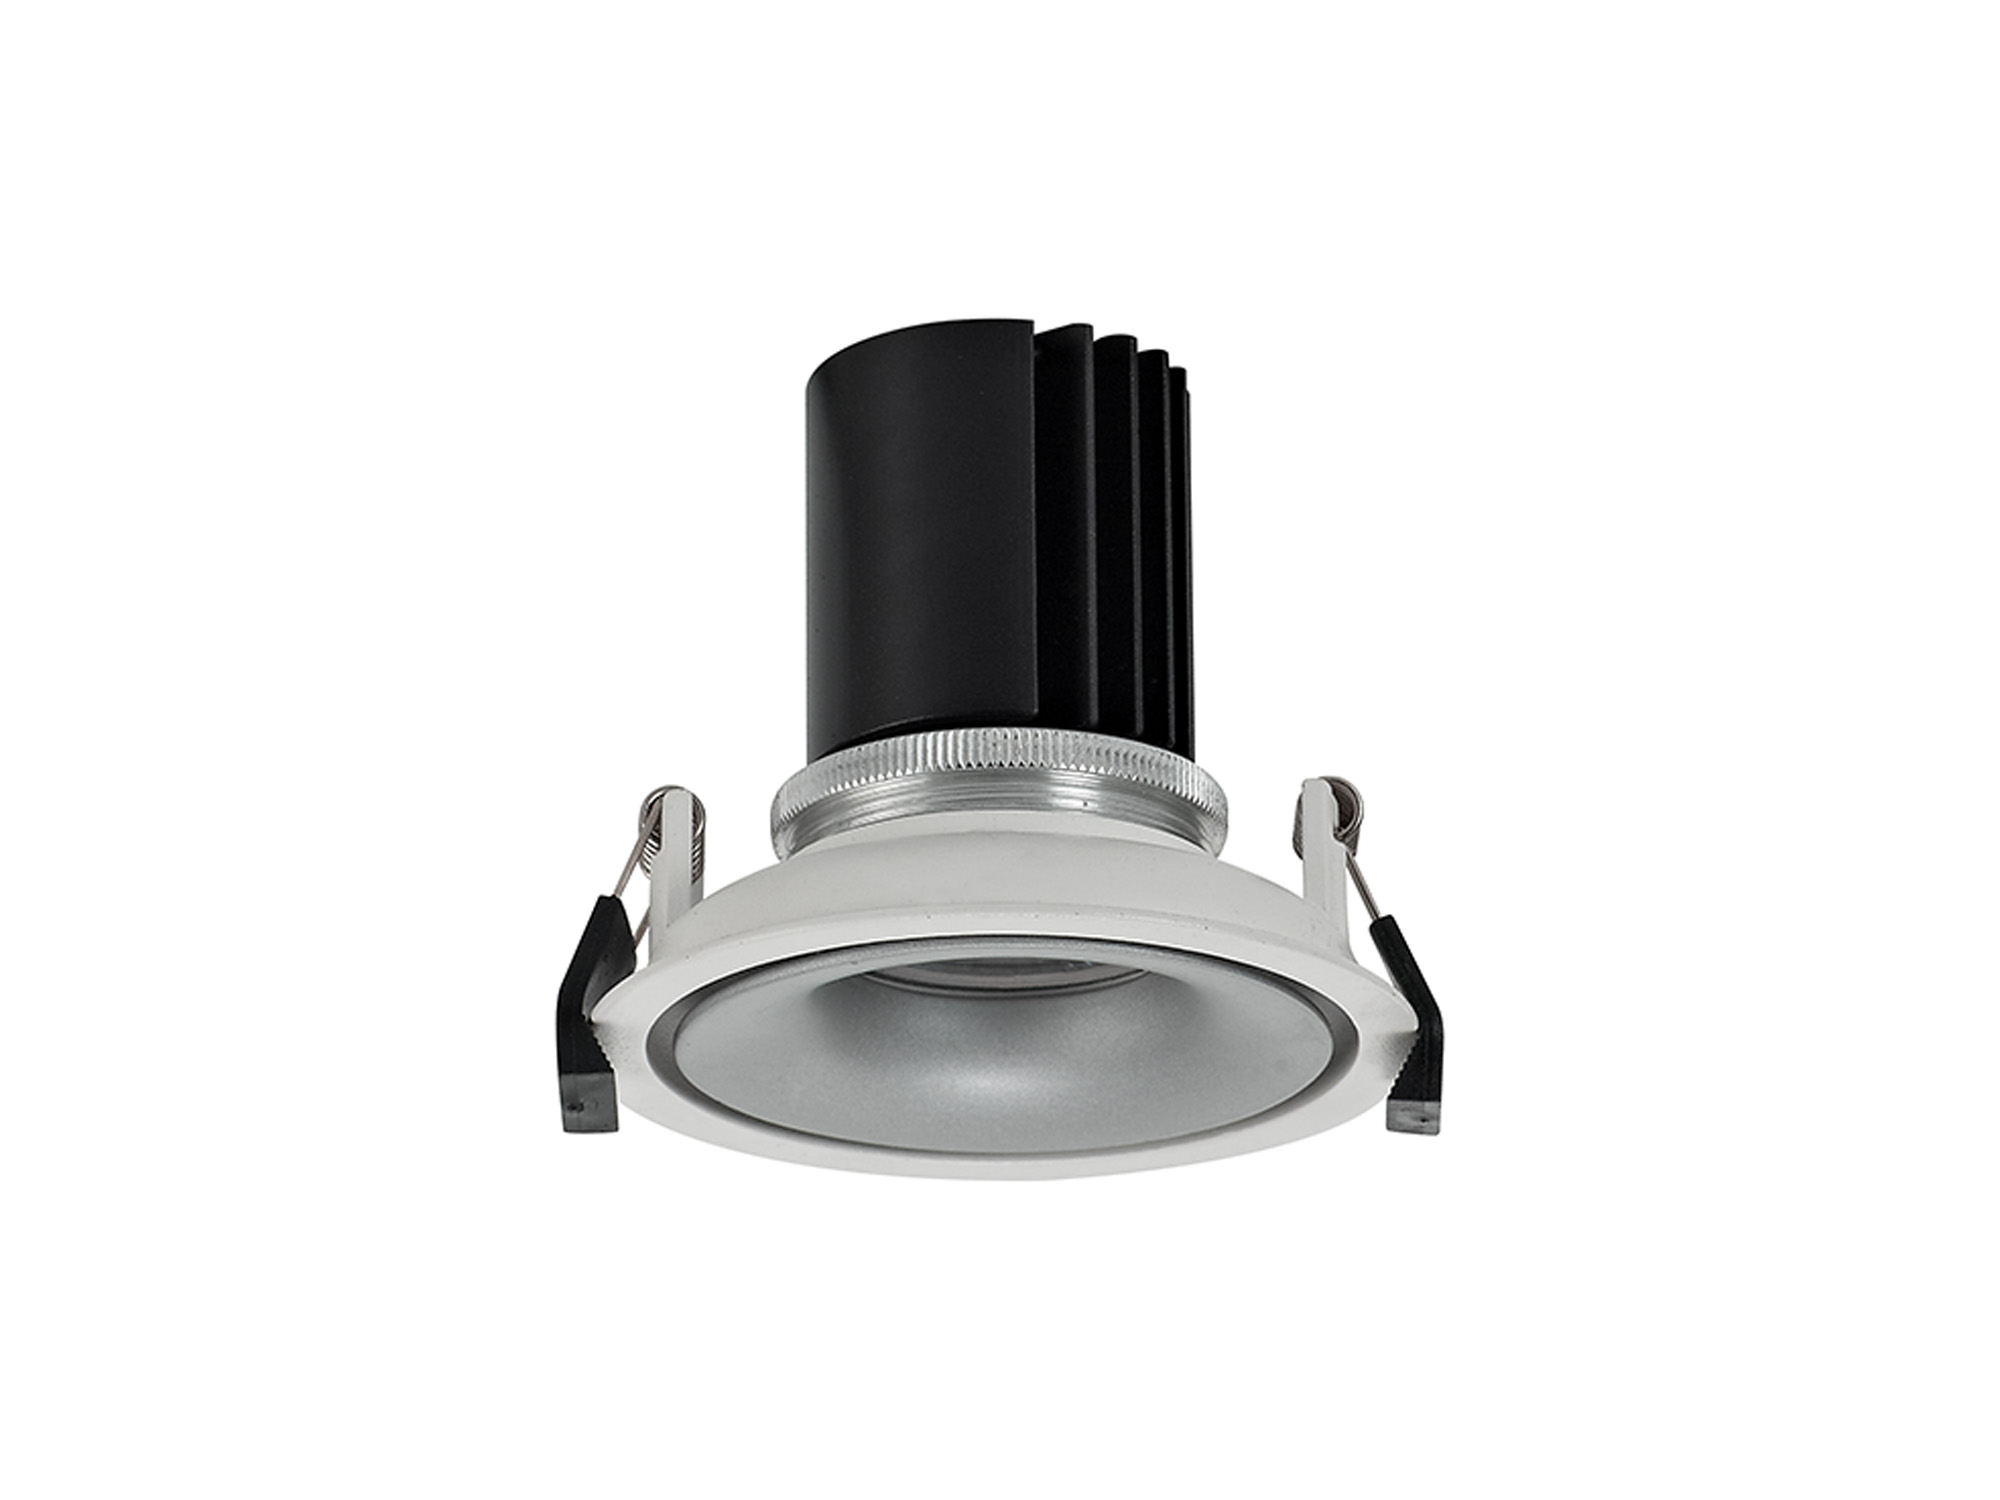 DM202117  Bolor 12 Tridonic Powered 12W 2700K 1200lm 12° CRI>90 LED Engine White/Silver Fixed Recessed Spotlight; IP20